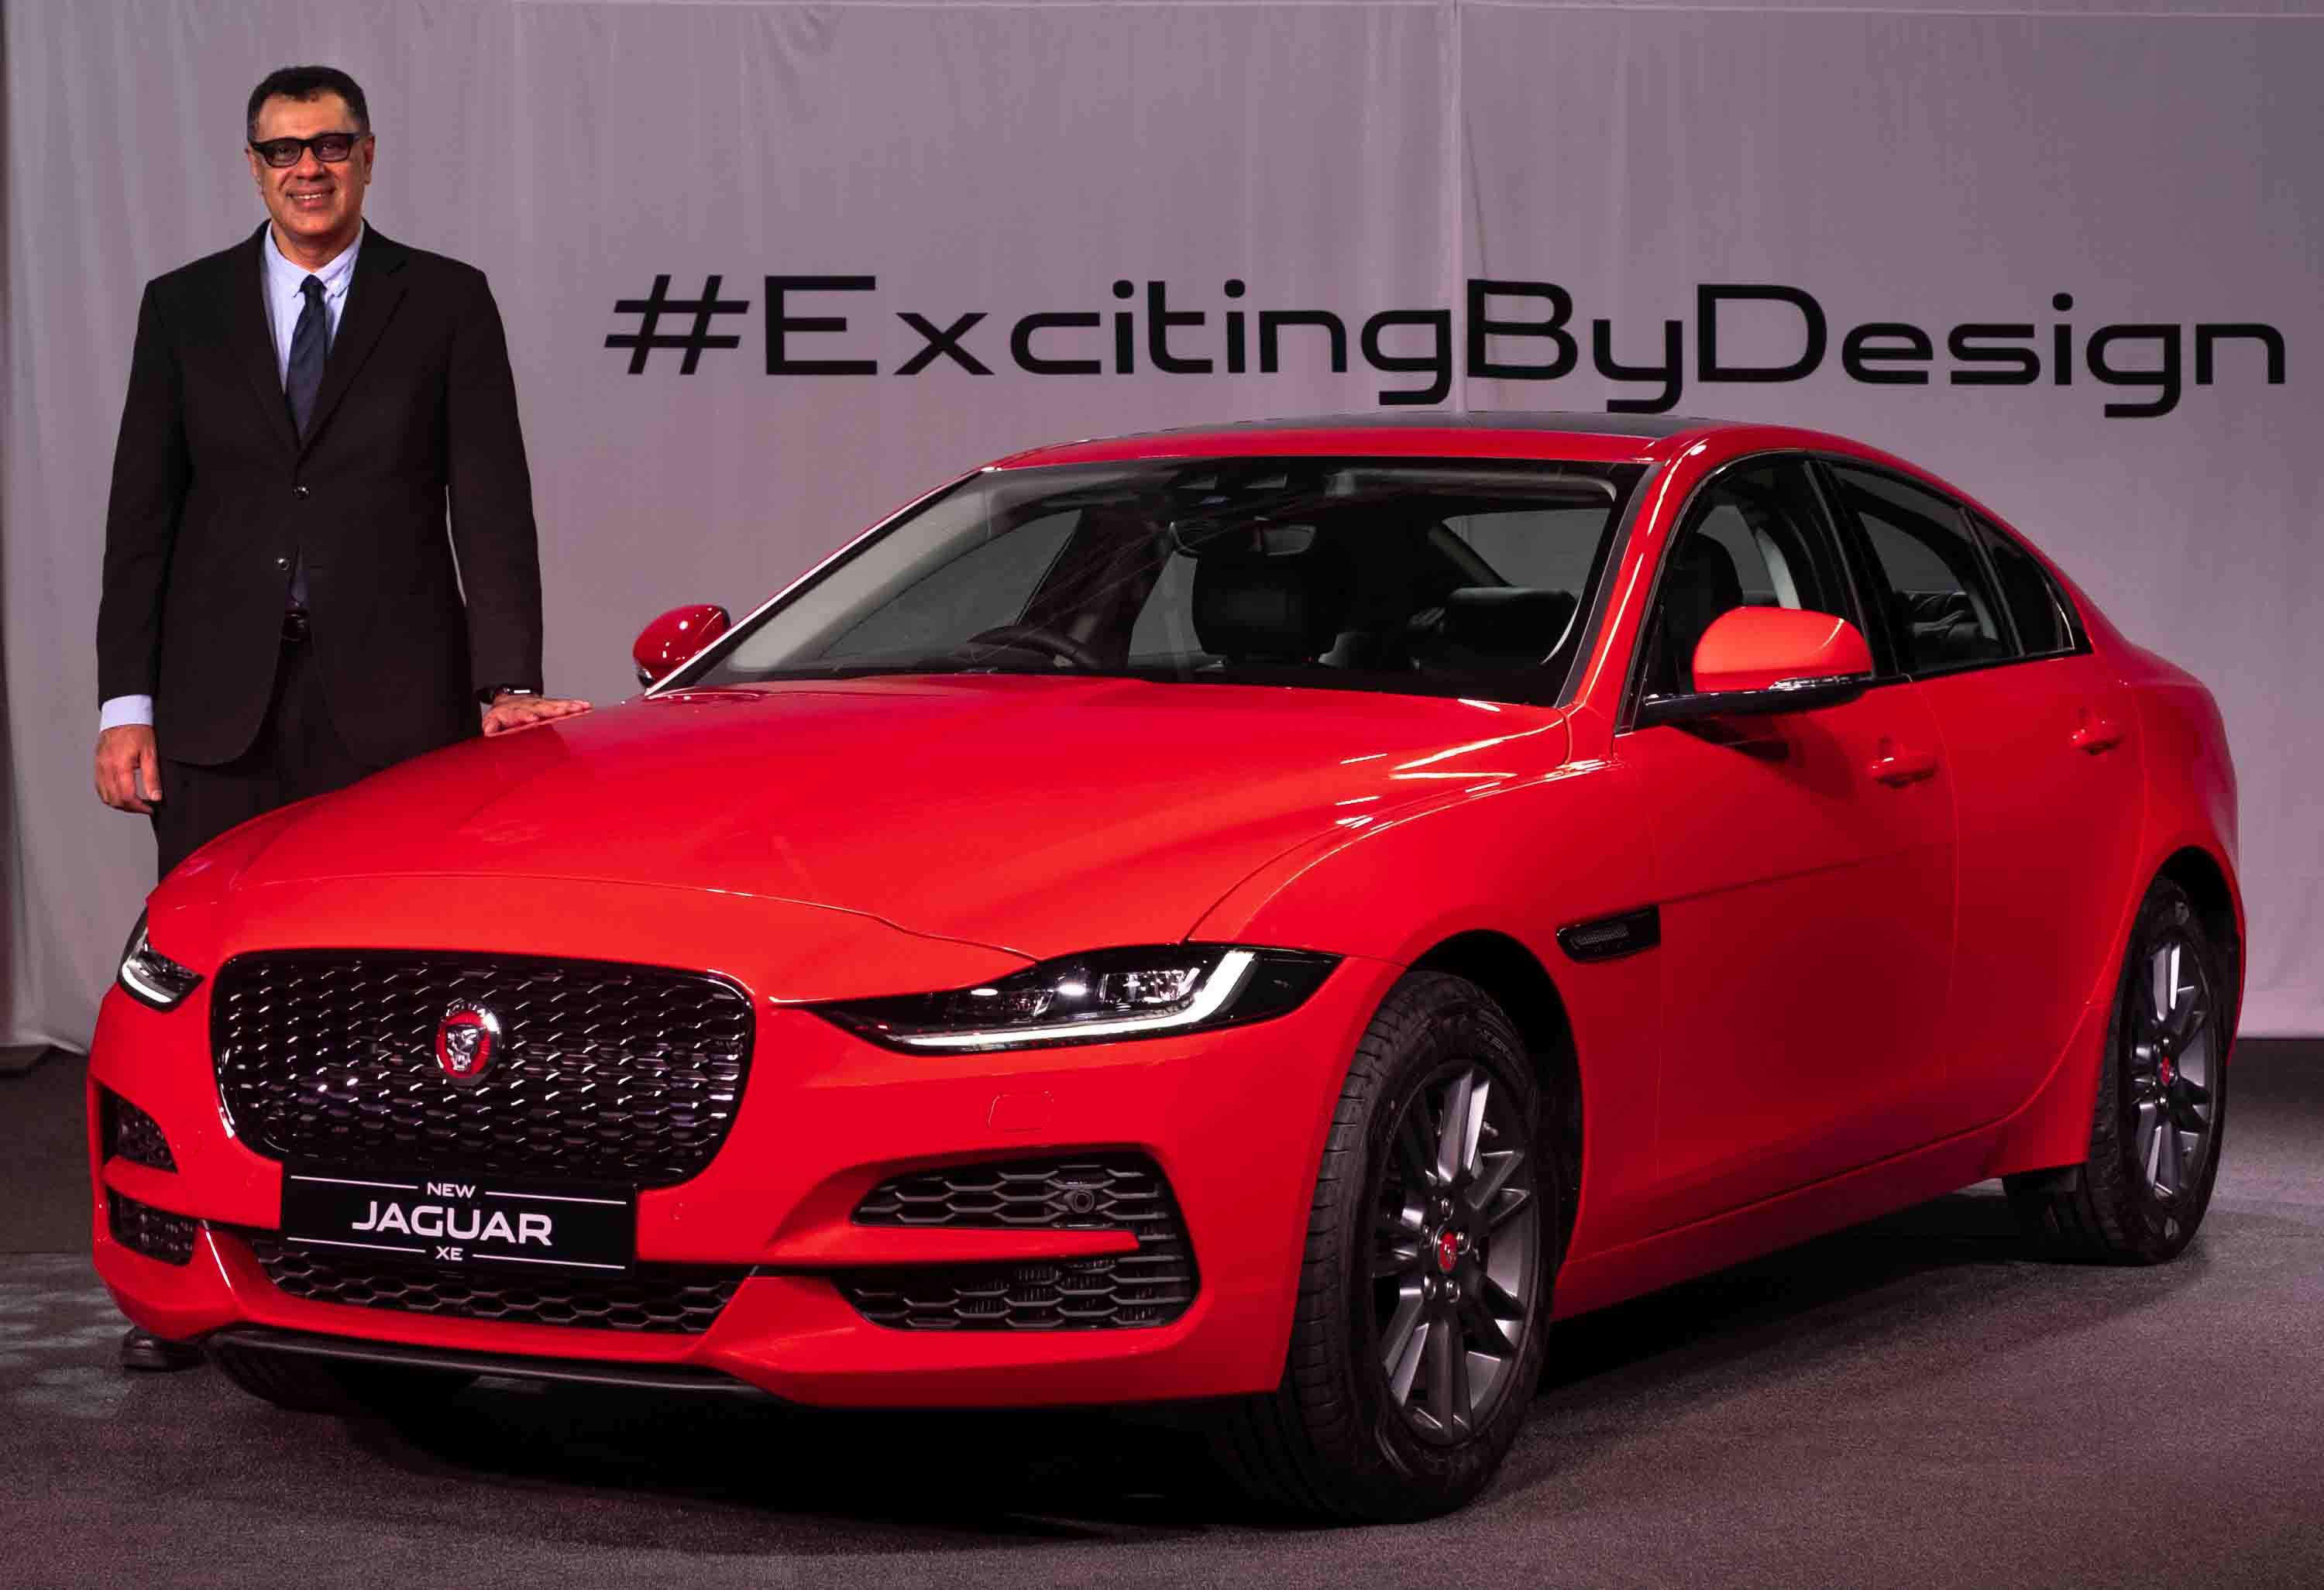 NEW JAGUAR XE LAUNCHED IN INDIA FROM Rs.44.98 LAKH